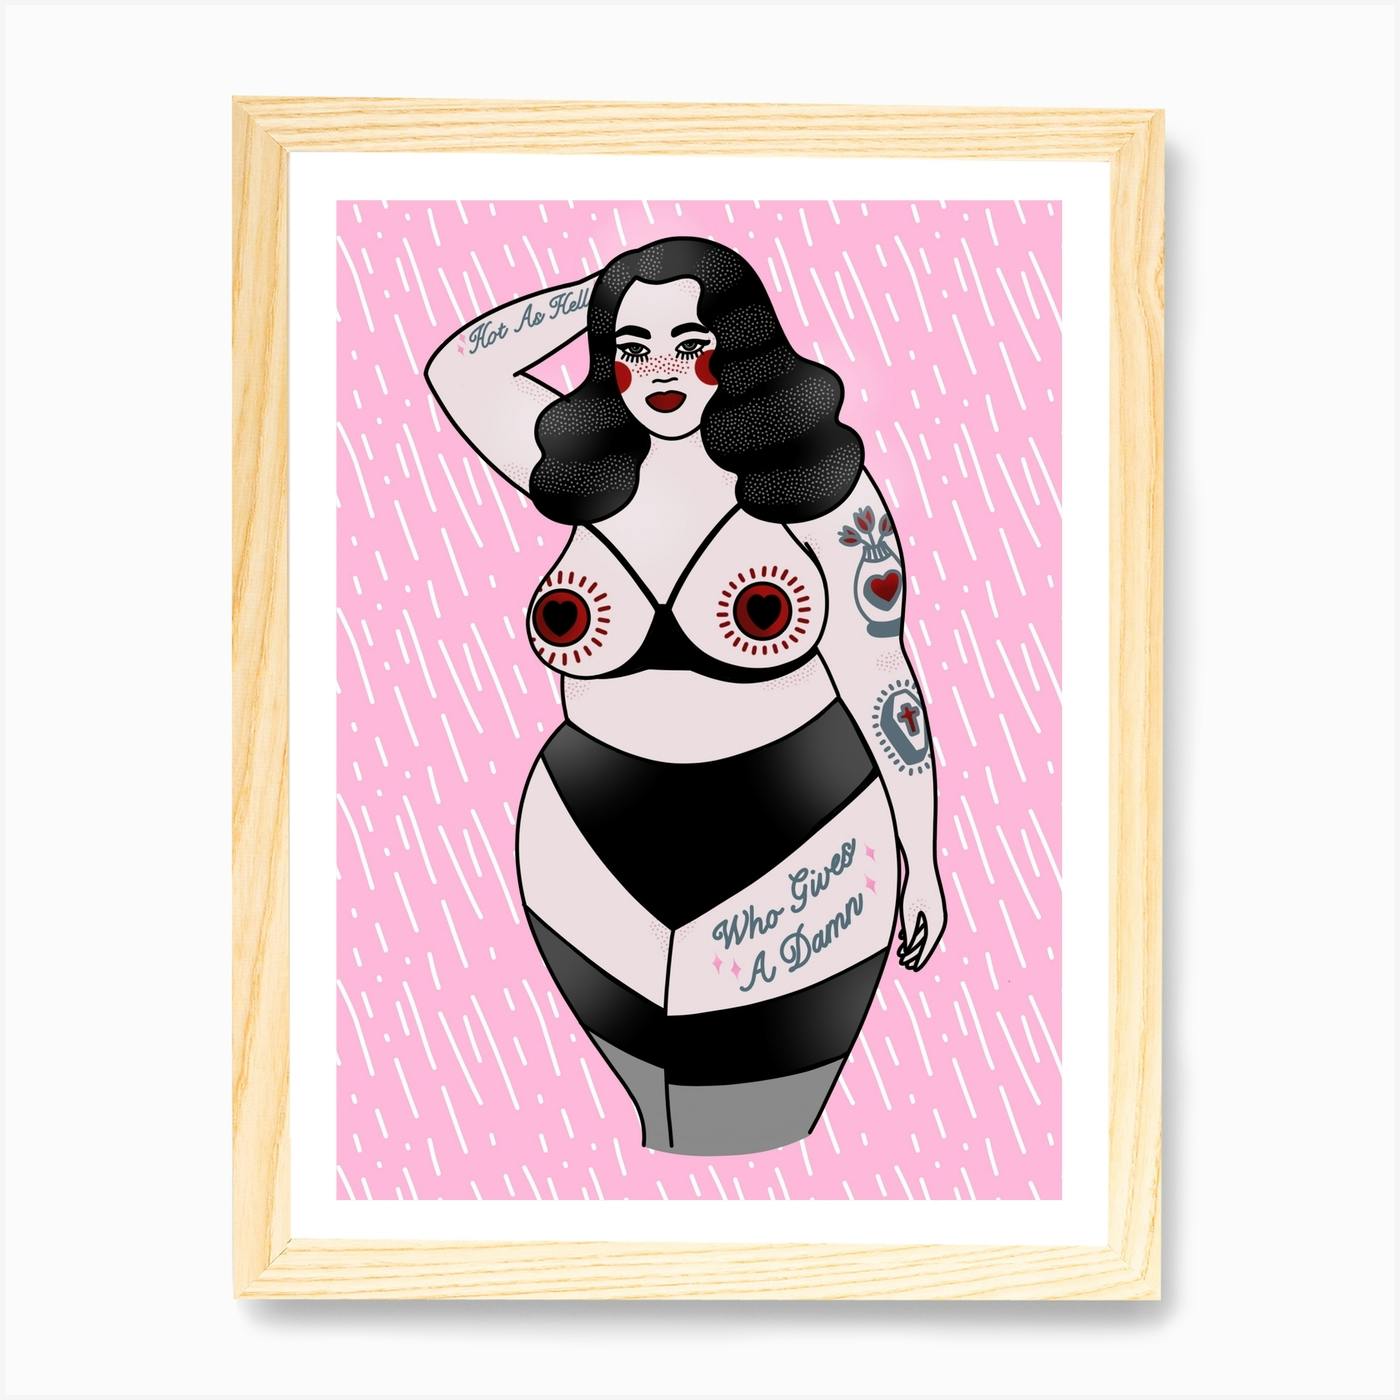 chris clifton recommends Chubby Pin Up Tattoo